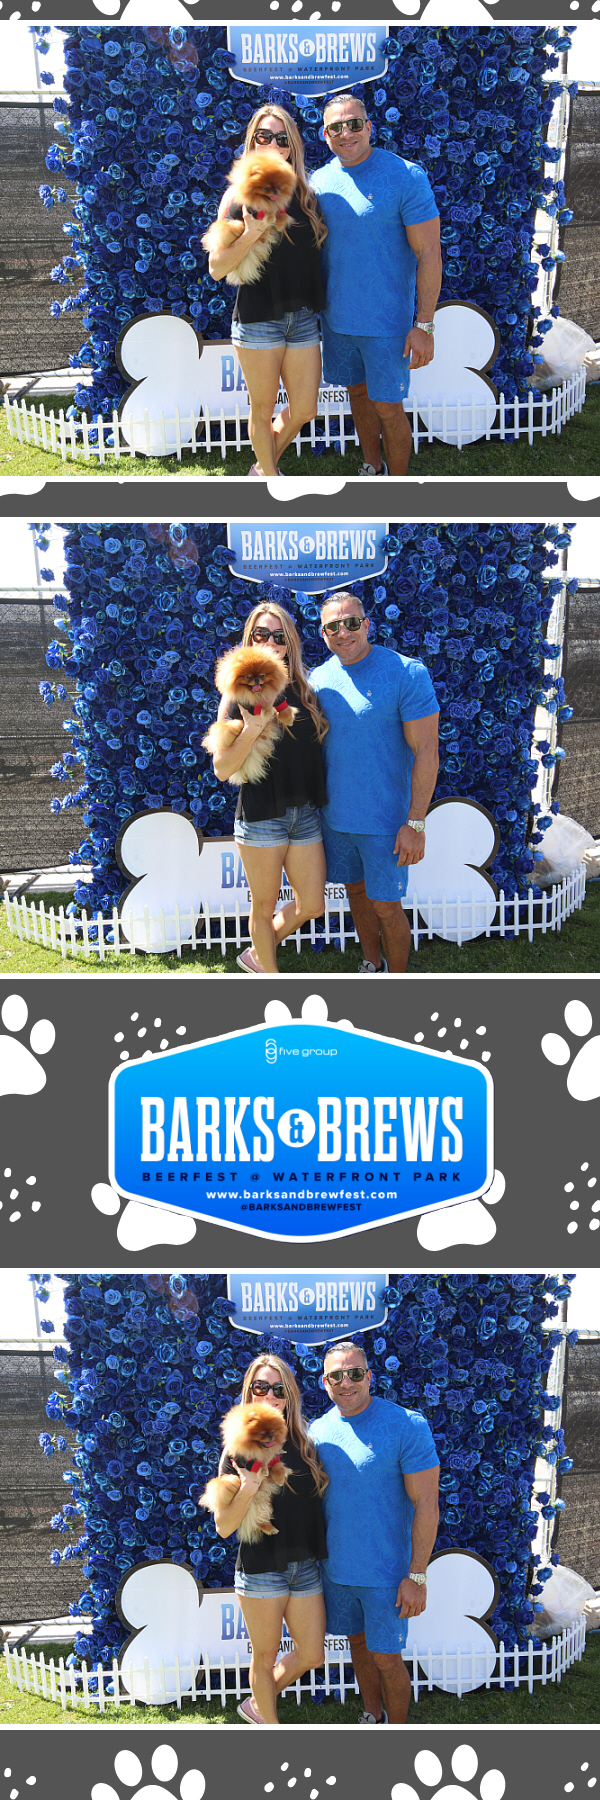 Barks Flower wall March 2023